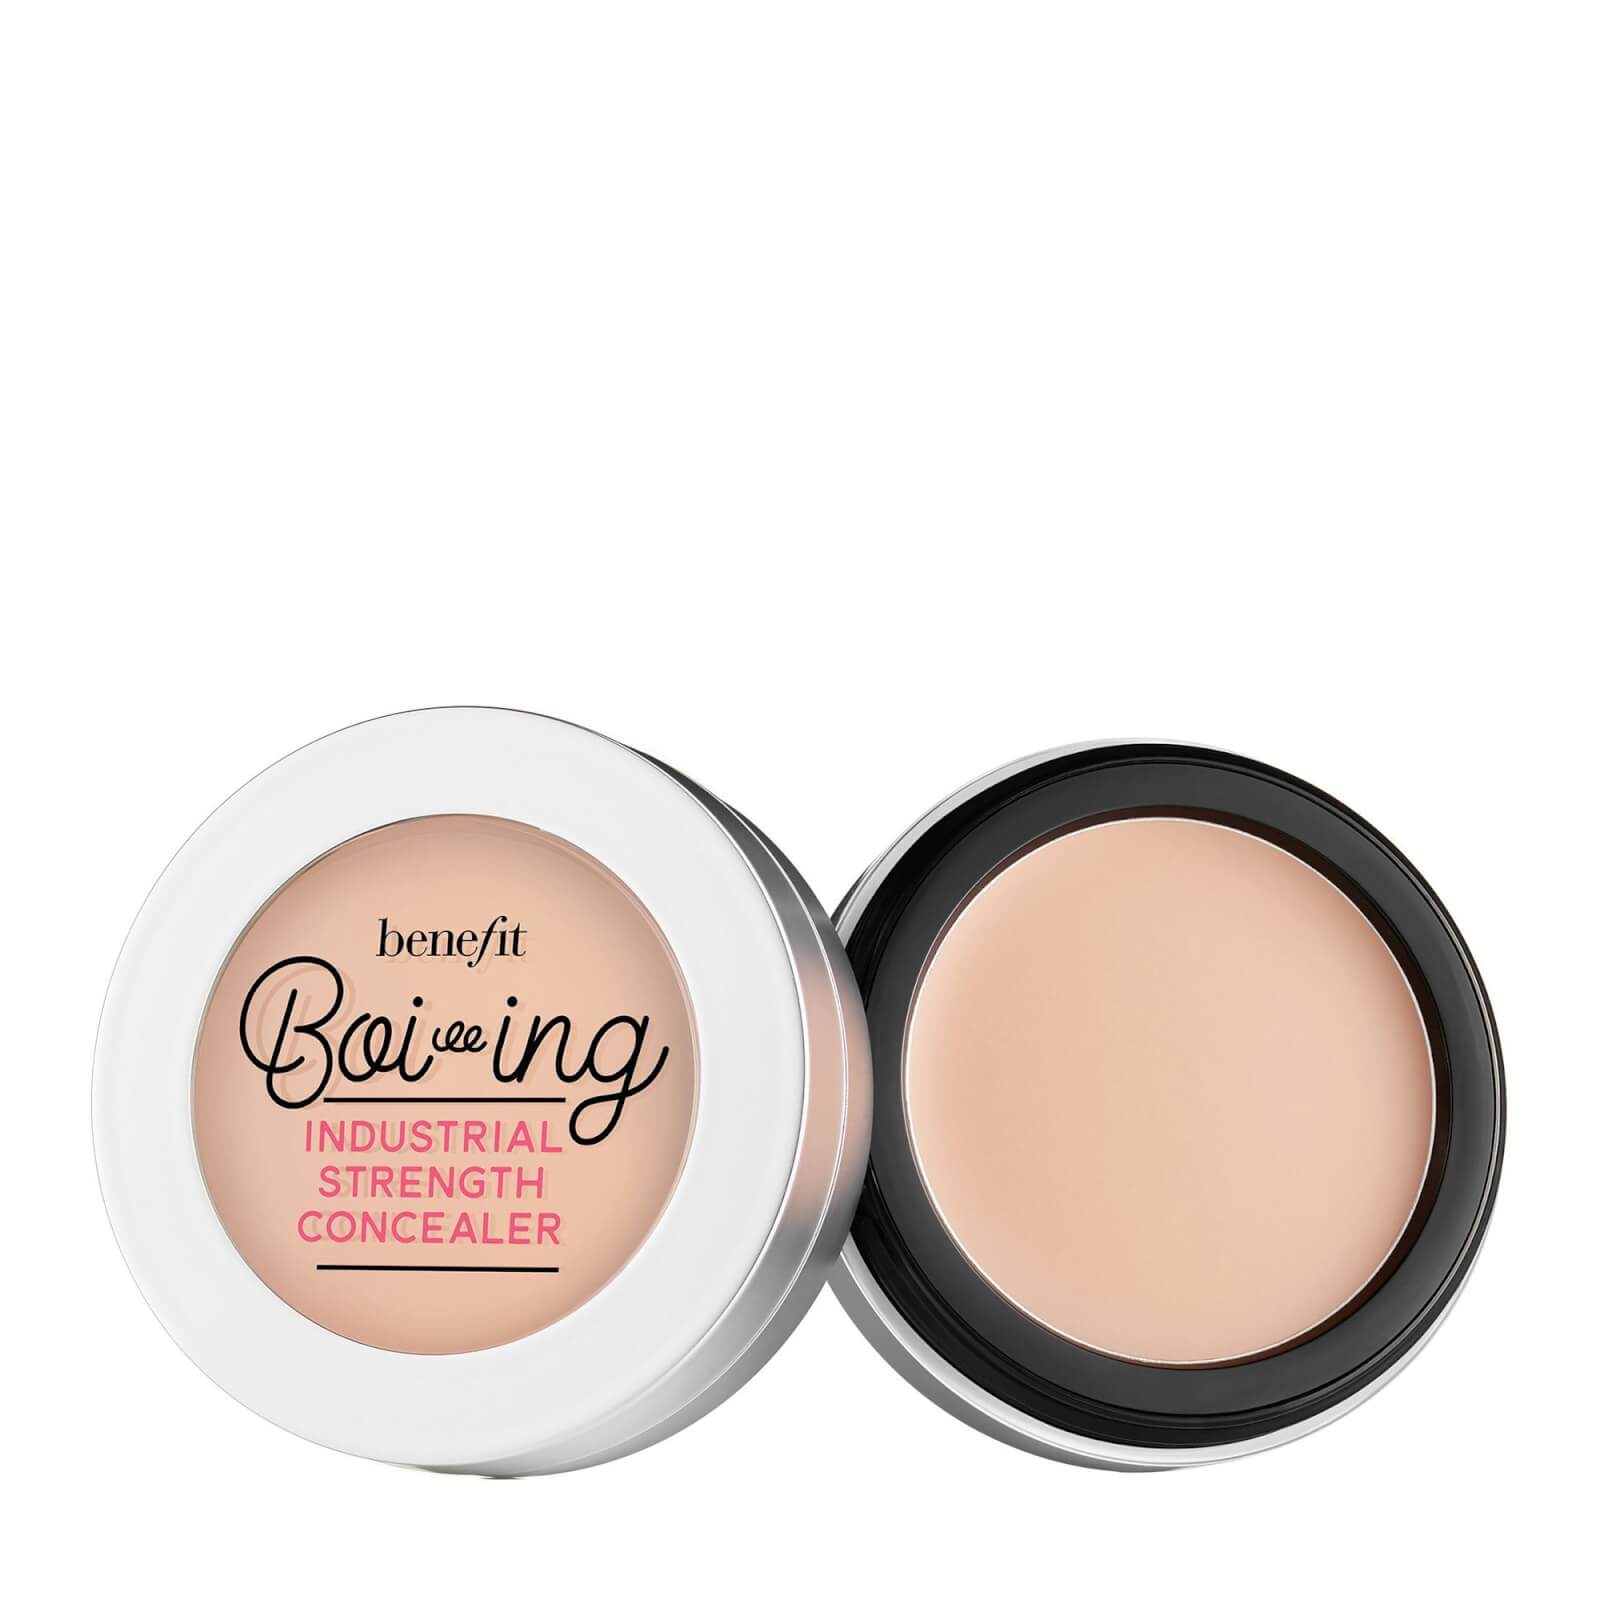 benefit Boi-ing Industrial Strength Concealer 3g (Various Shades) - 01